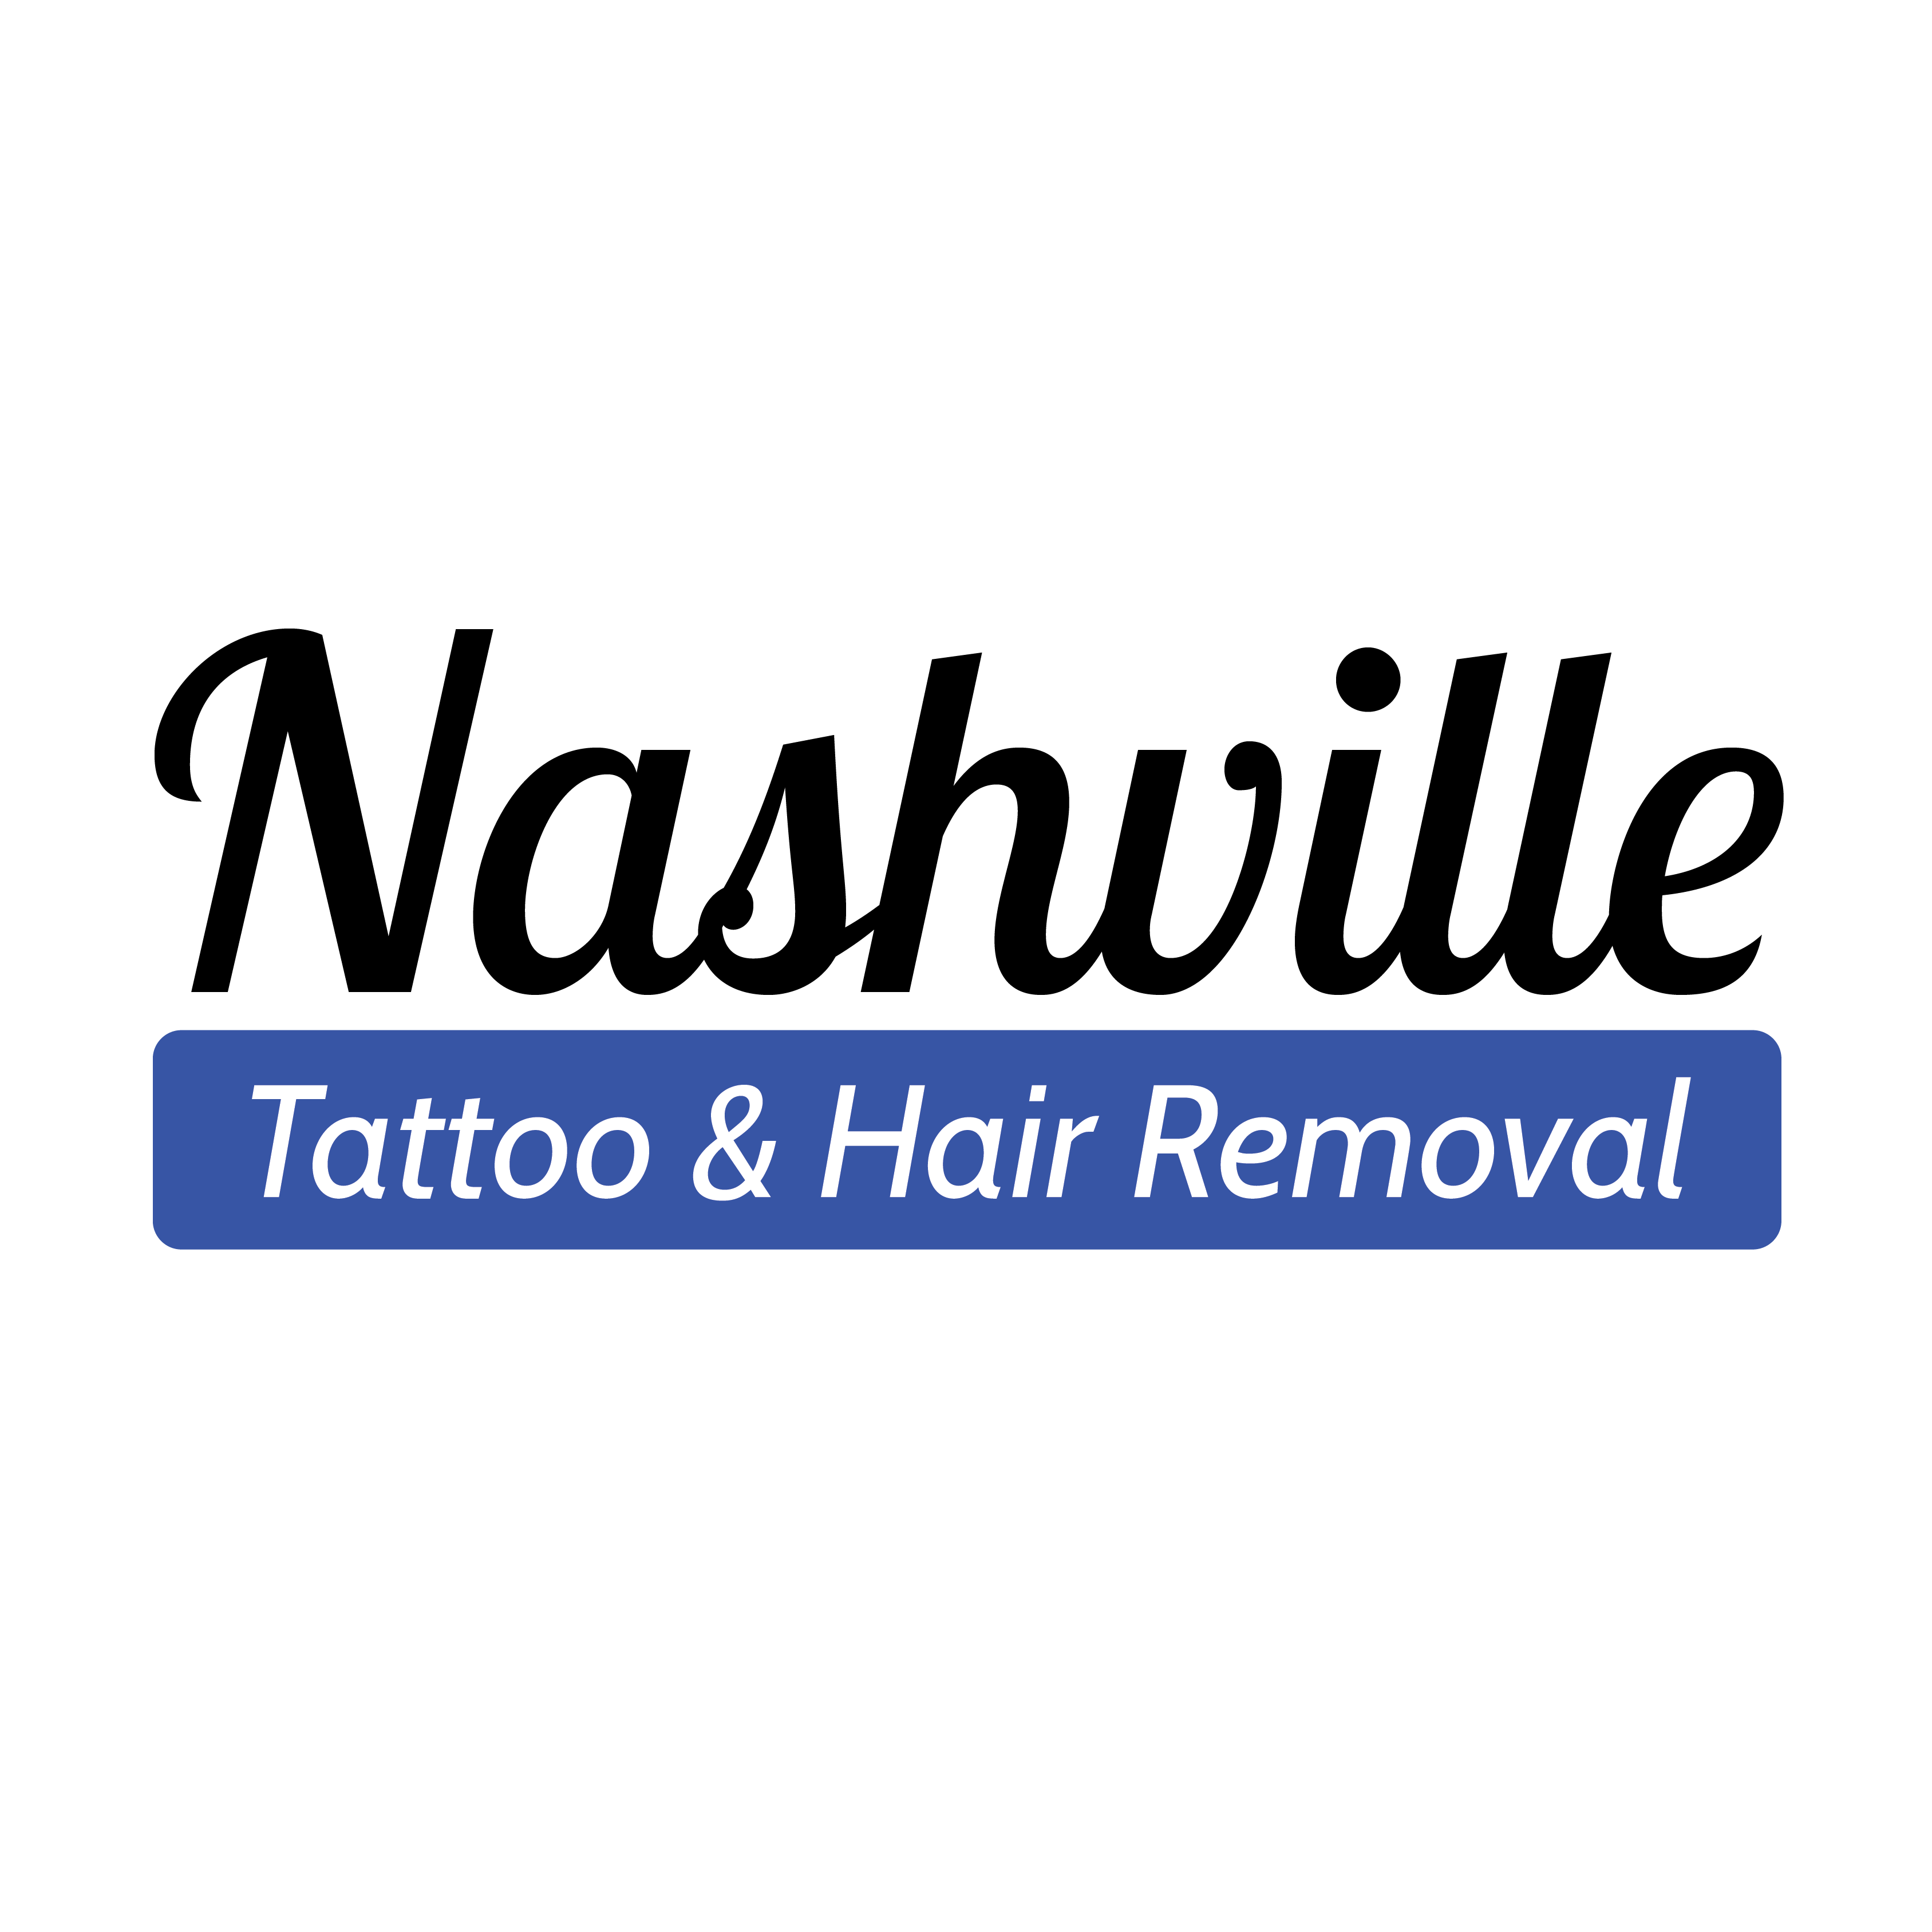 Tattoo Removal coupons and savings, 411 East Iris Dr., Nashville, TN ...